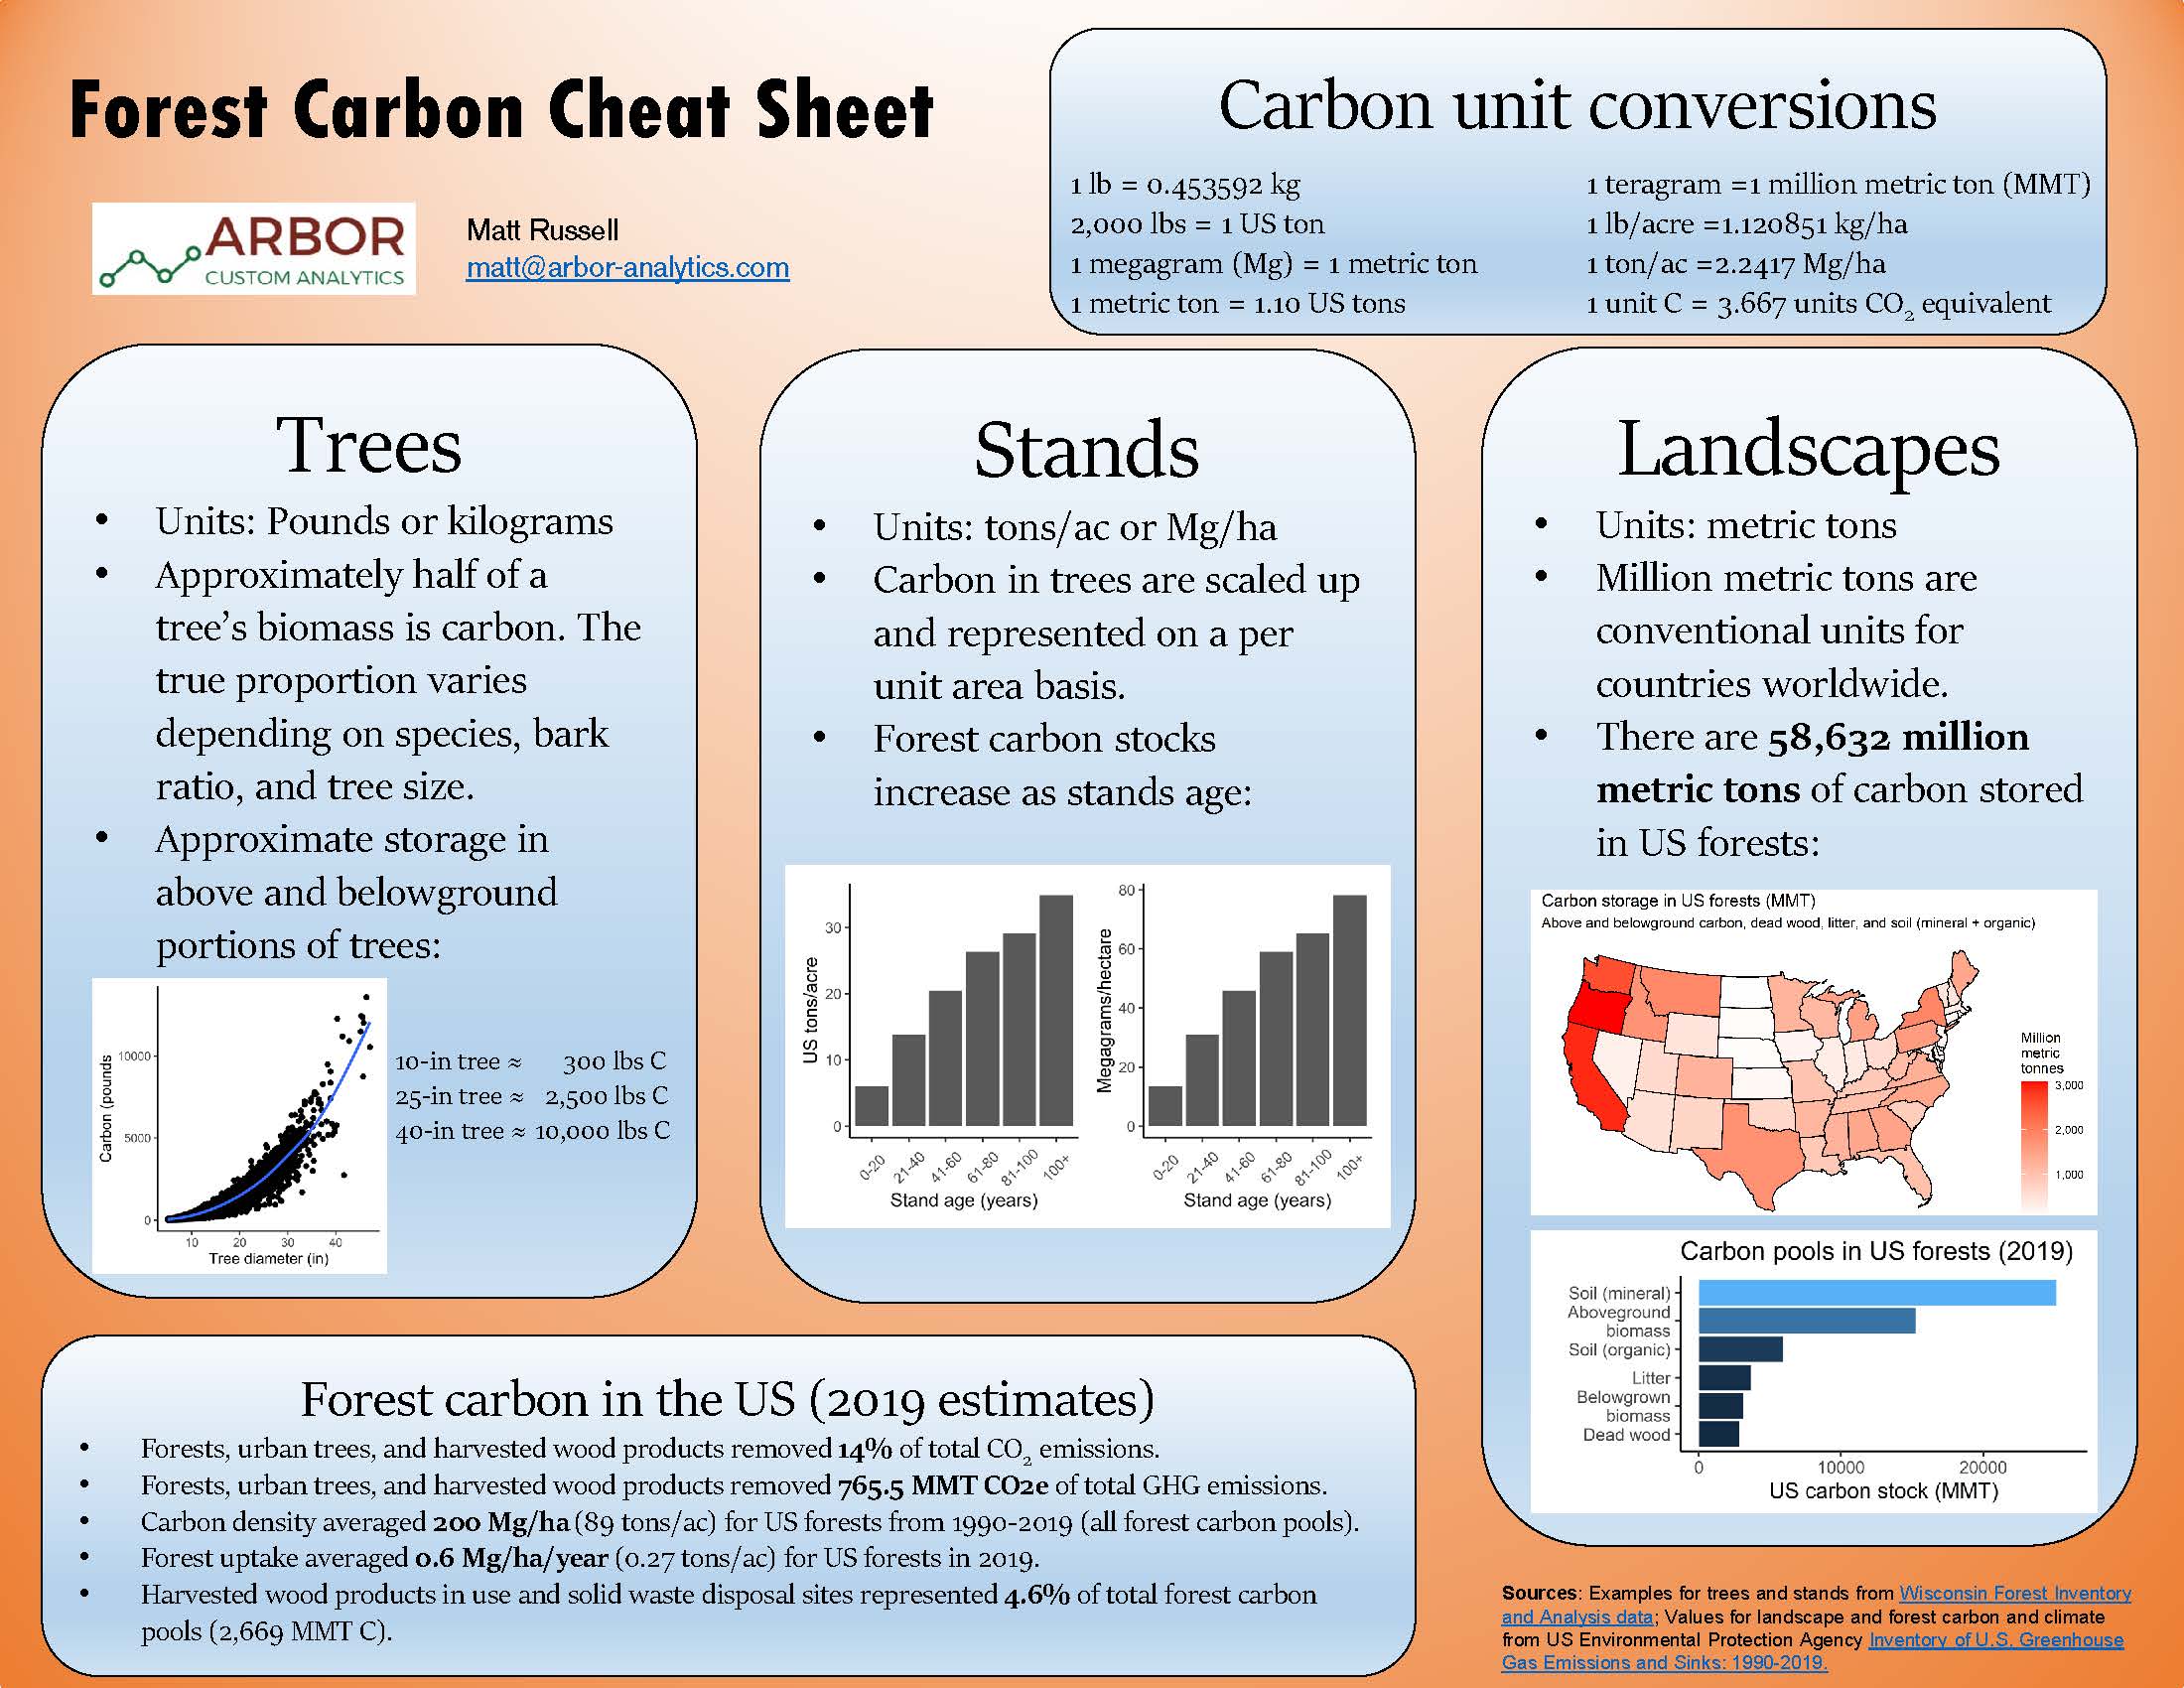 The Forest Carbon Cheat Sheet.